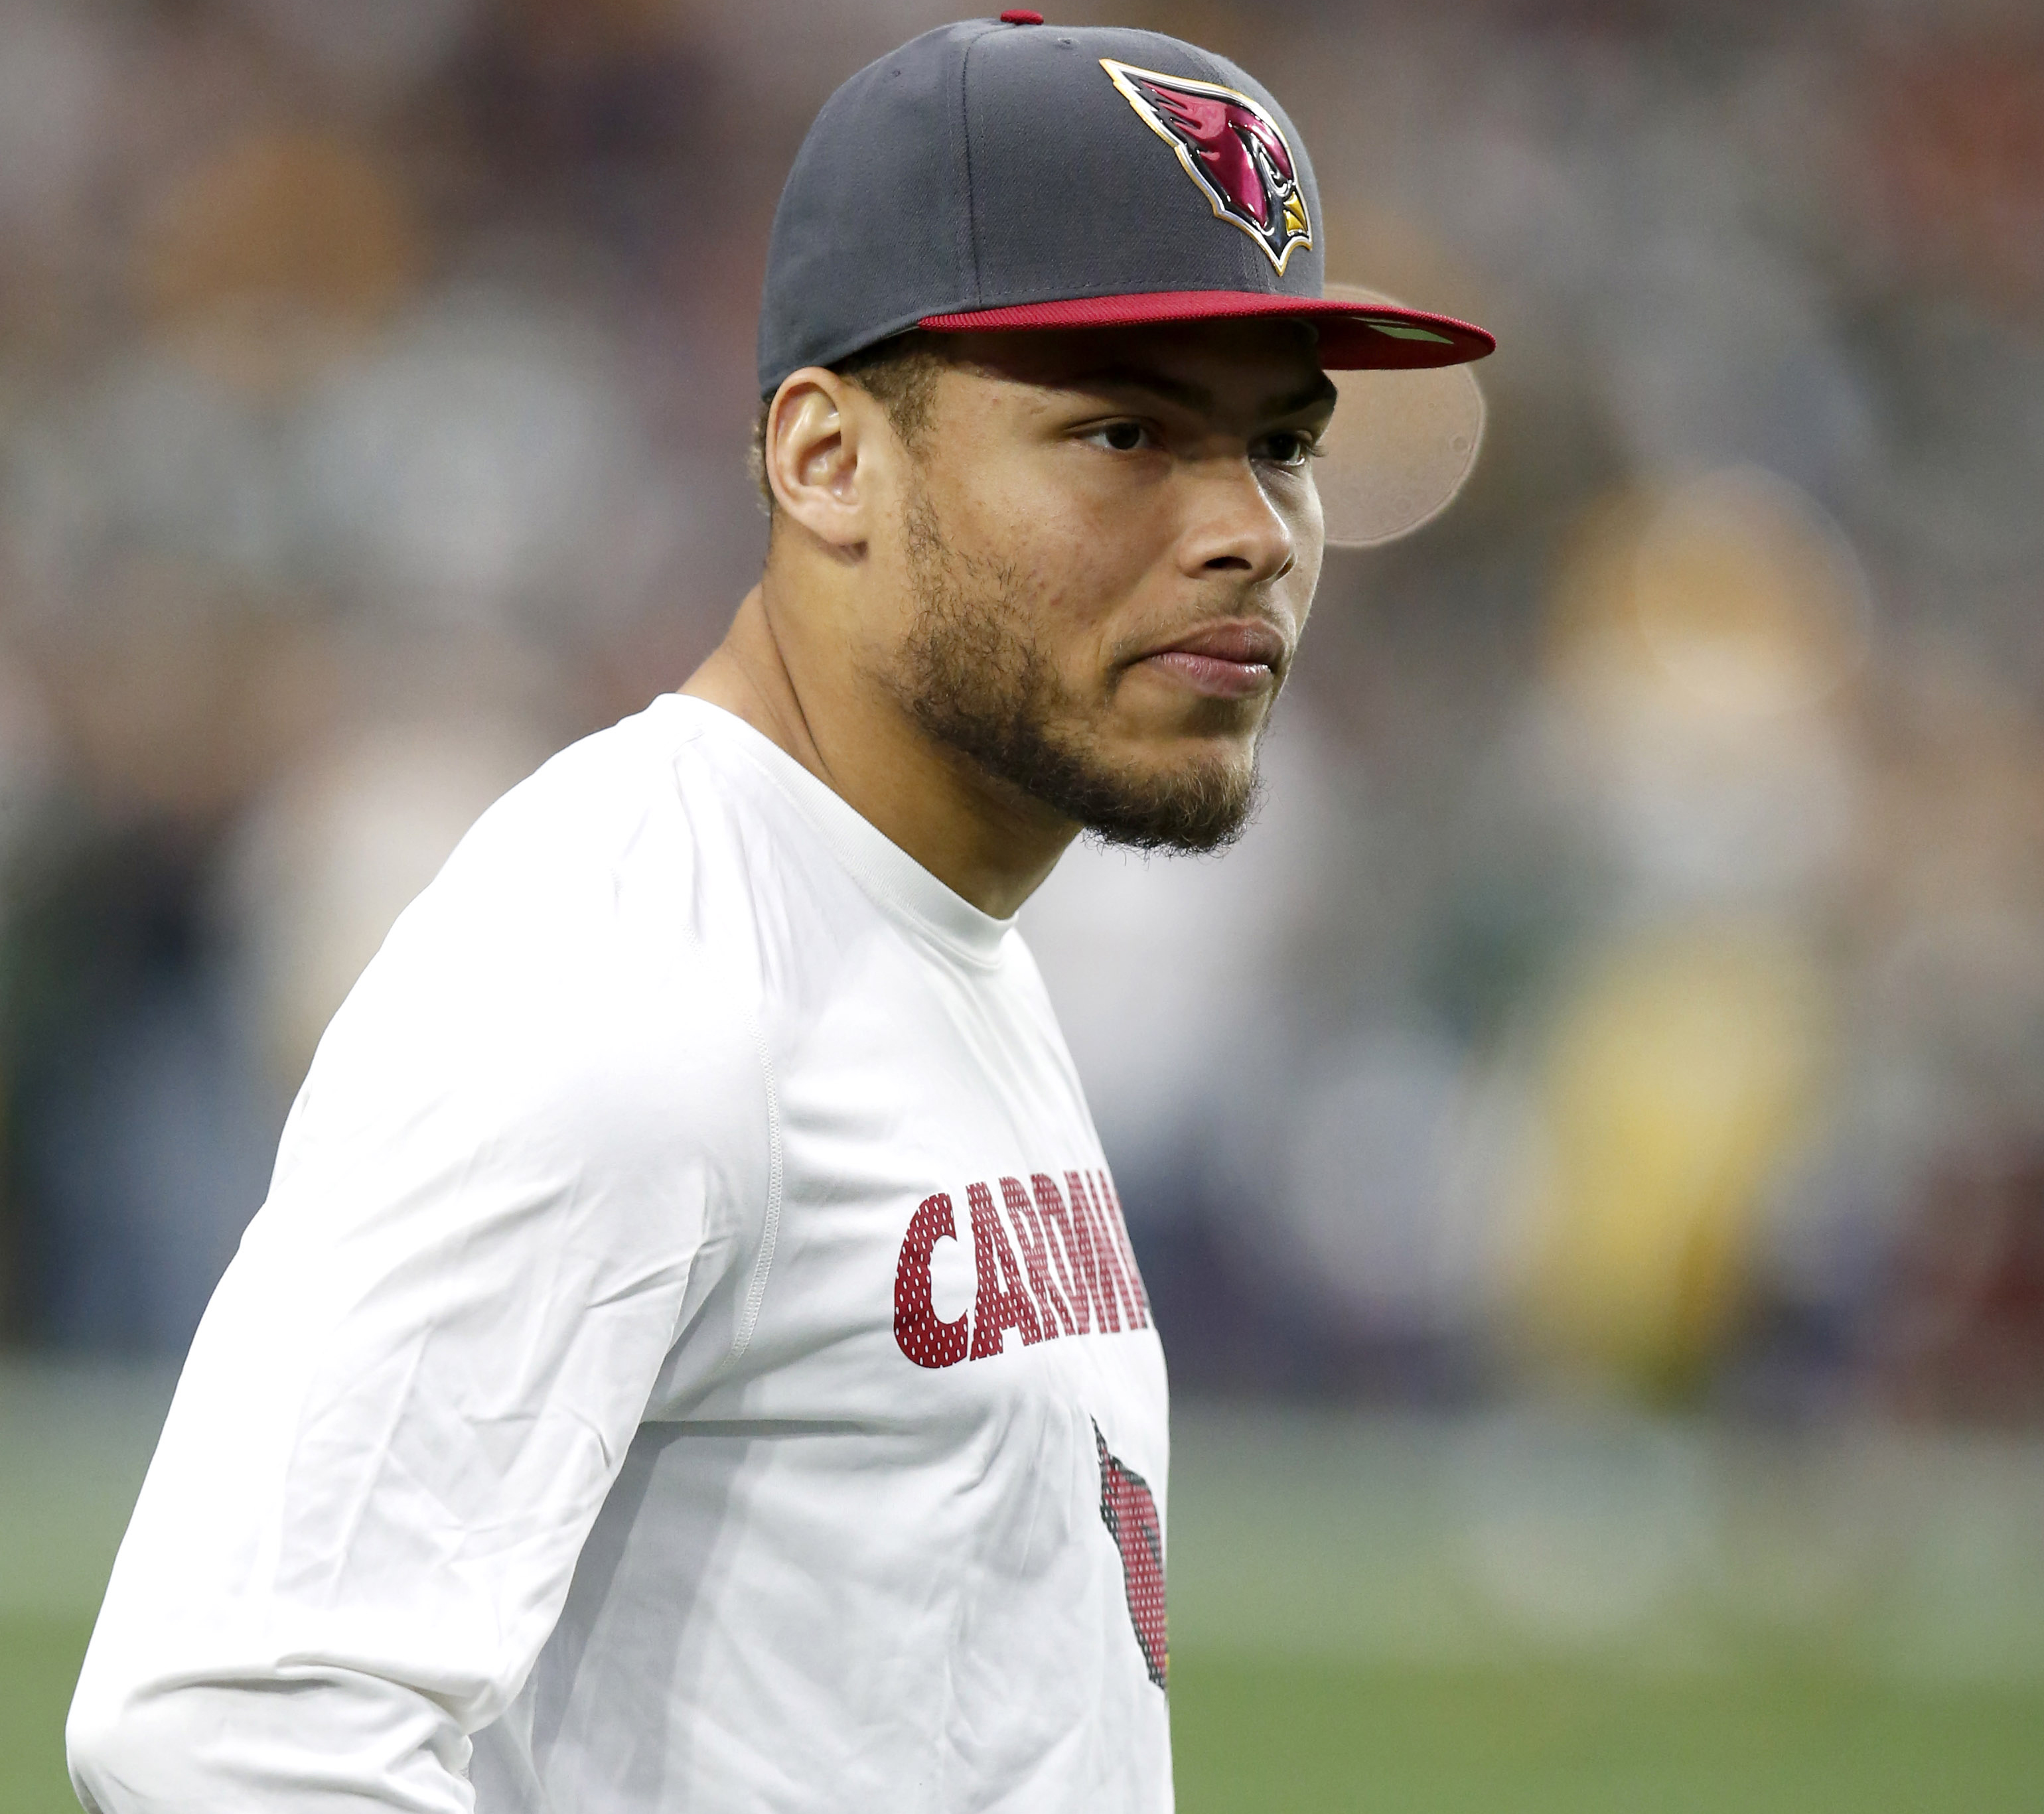 Injured Arizona Cardinals free safety Tyrann Mathieu watches his teammates prior to an NFL football game against the Green Bay Packers, Sunday, Dec. 27, 2015, in Glendale, Ariz. (AP Photo/Rick Scuteri)